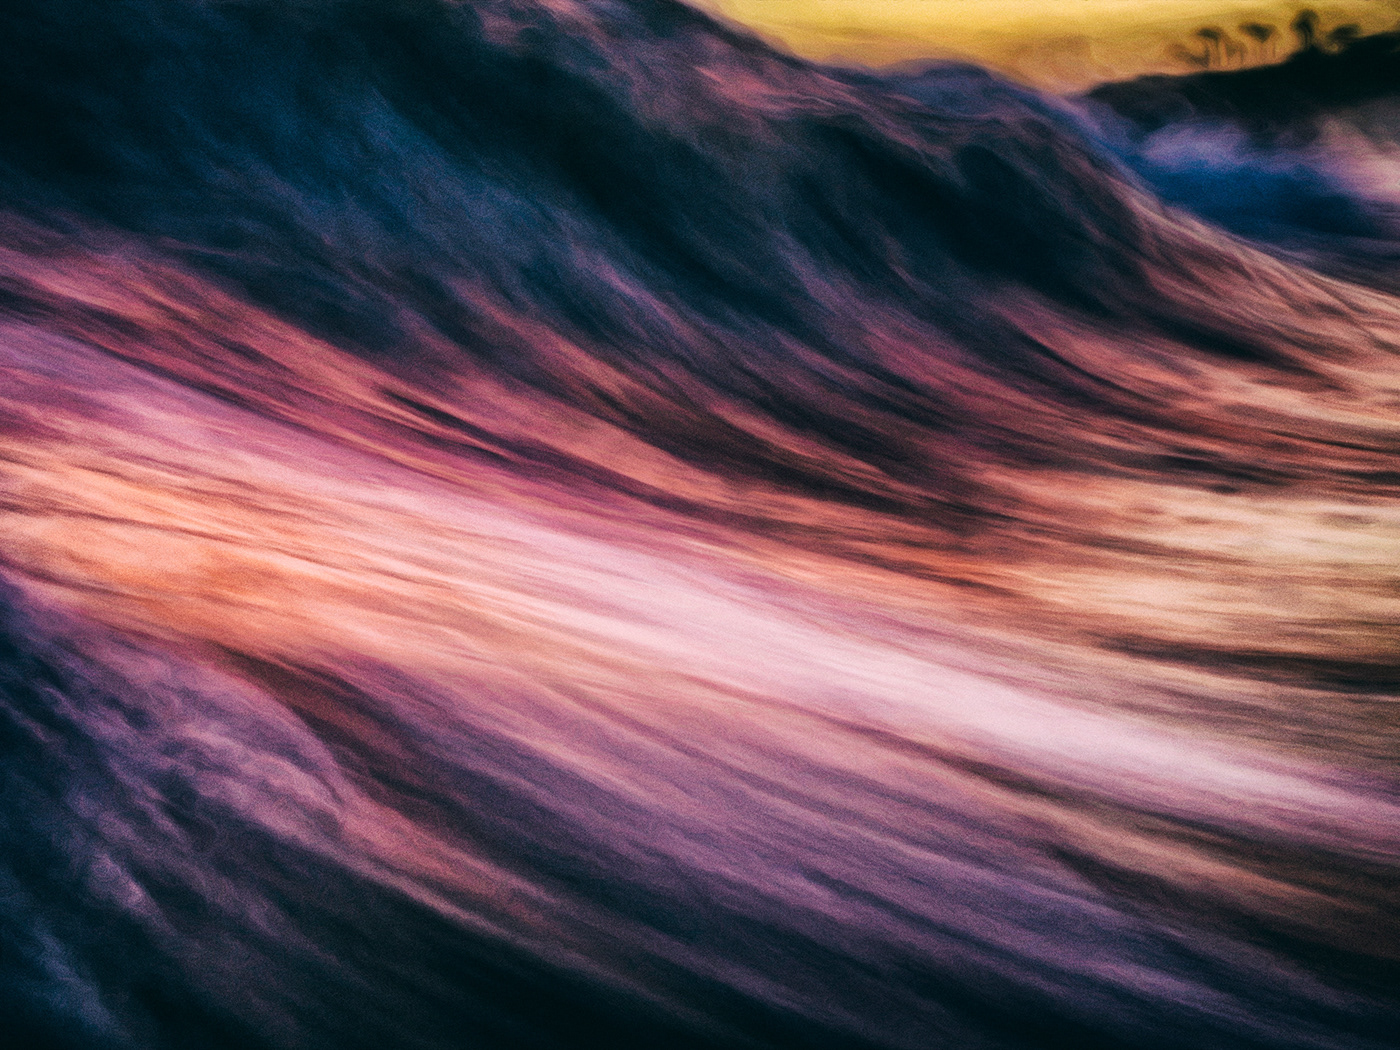 wave waves water Ocean Day sunset mood abstract art fine art